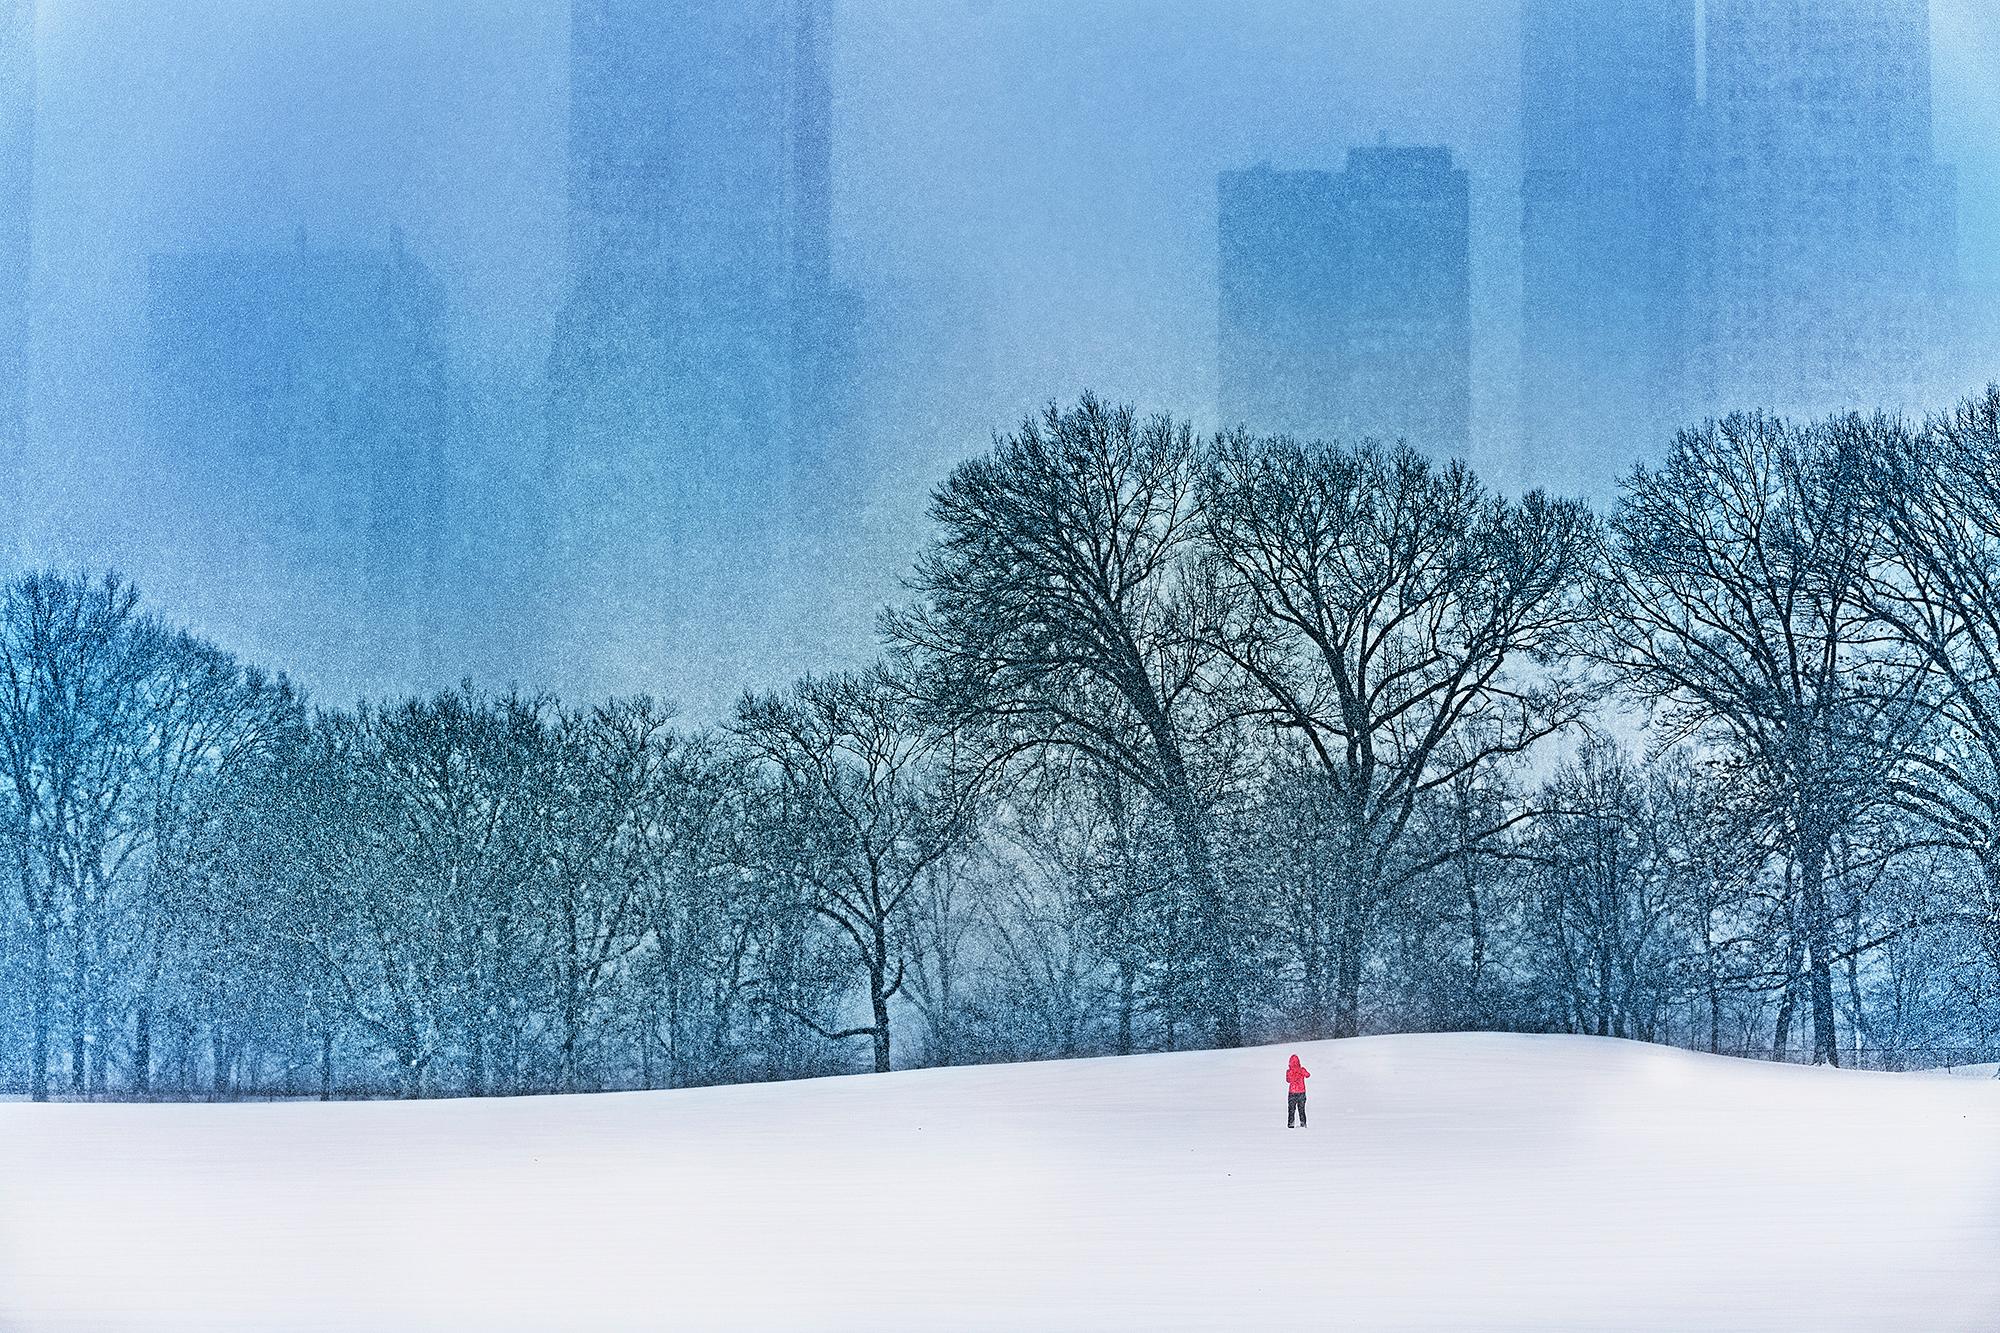 Mitchell Funk Color Photograph - Snow in Central Park  Billionaire Row -  Monochromatic  Grey and Blue 